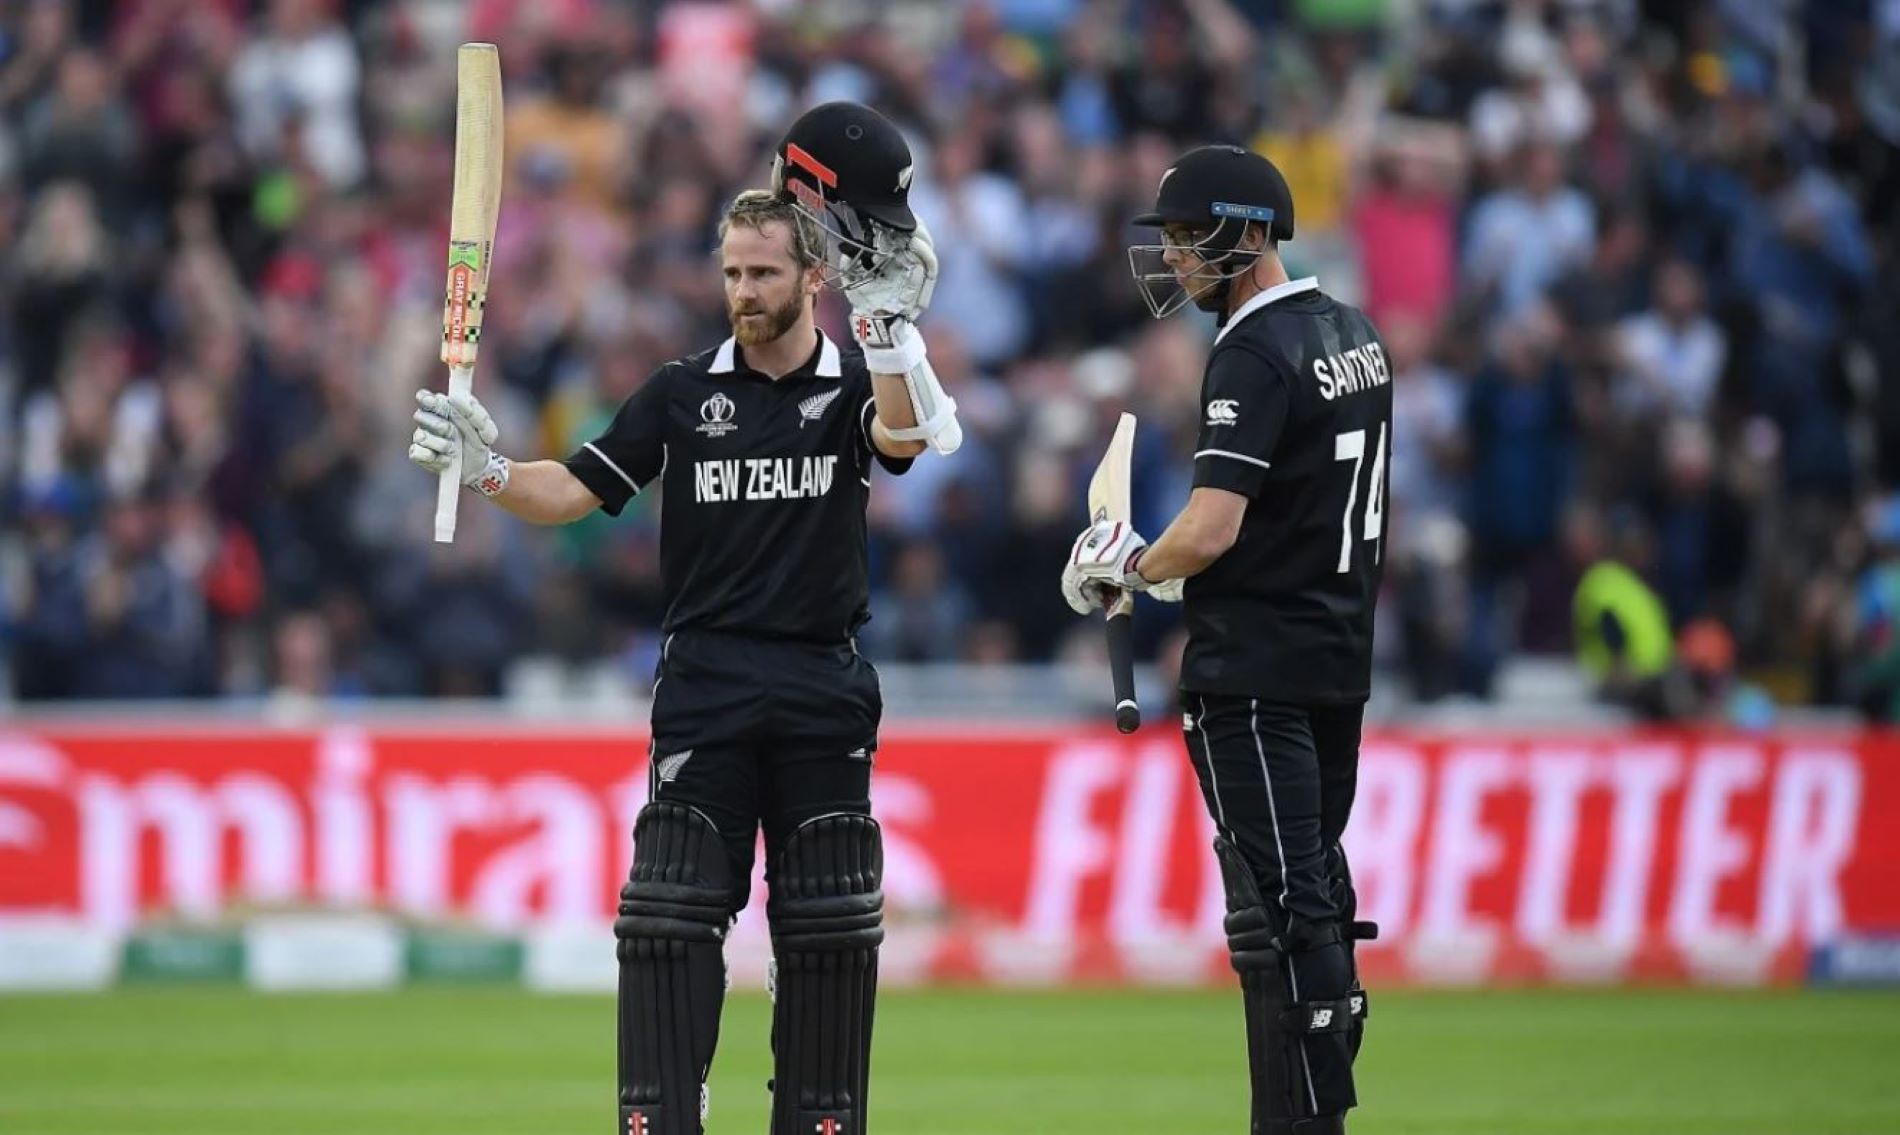 Kane Williamson single-handedly led New Zealand to a final-over victory against the Proteas.